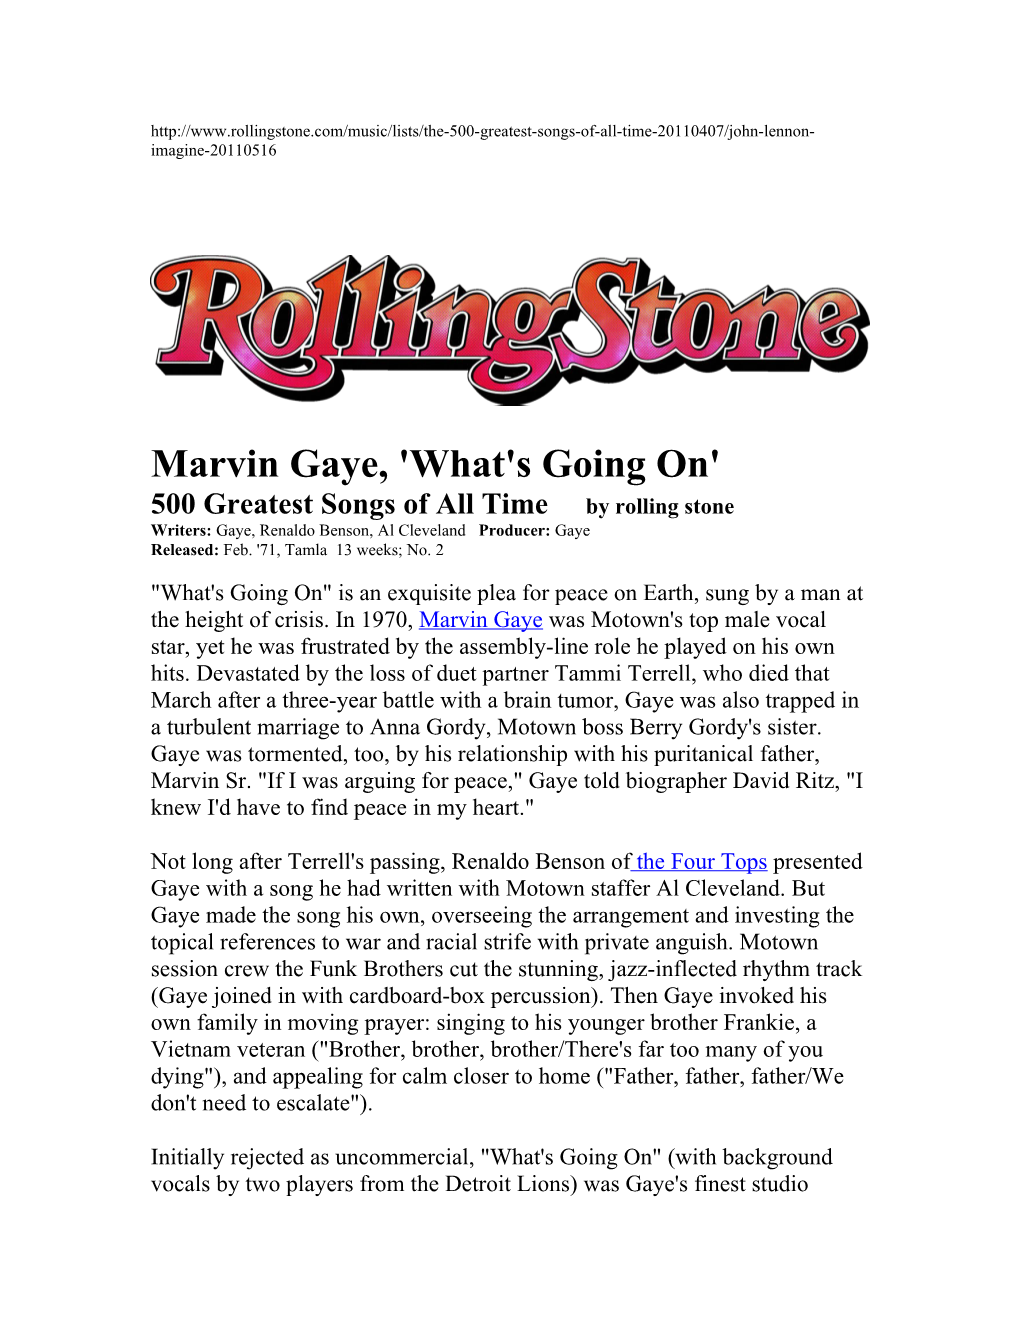 500 Greatest Songs of All Timeby Rolling Stone